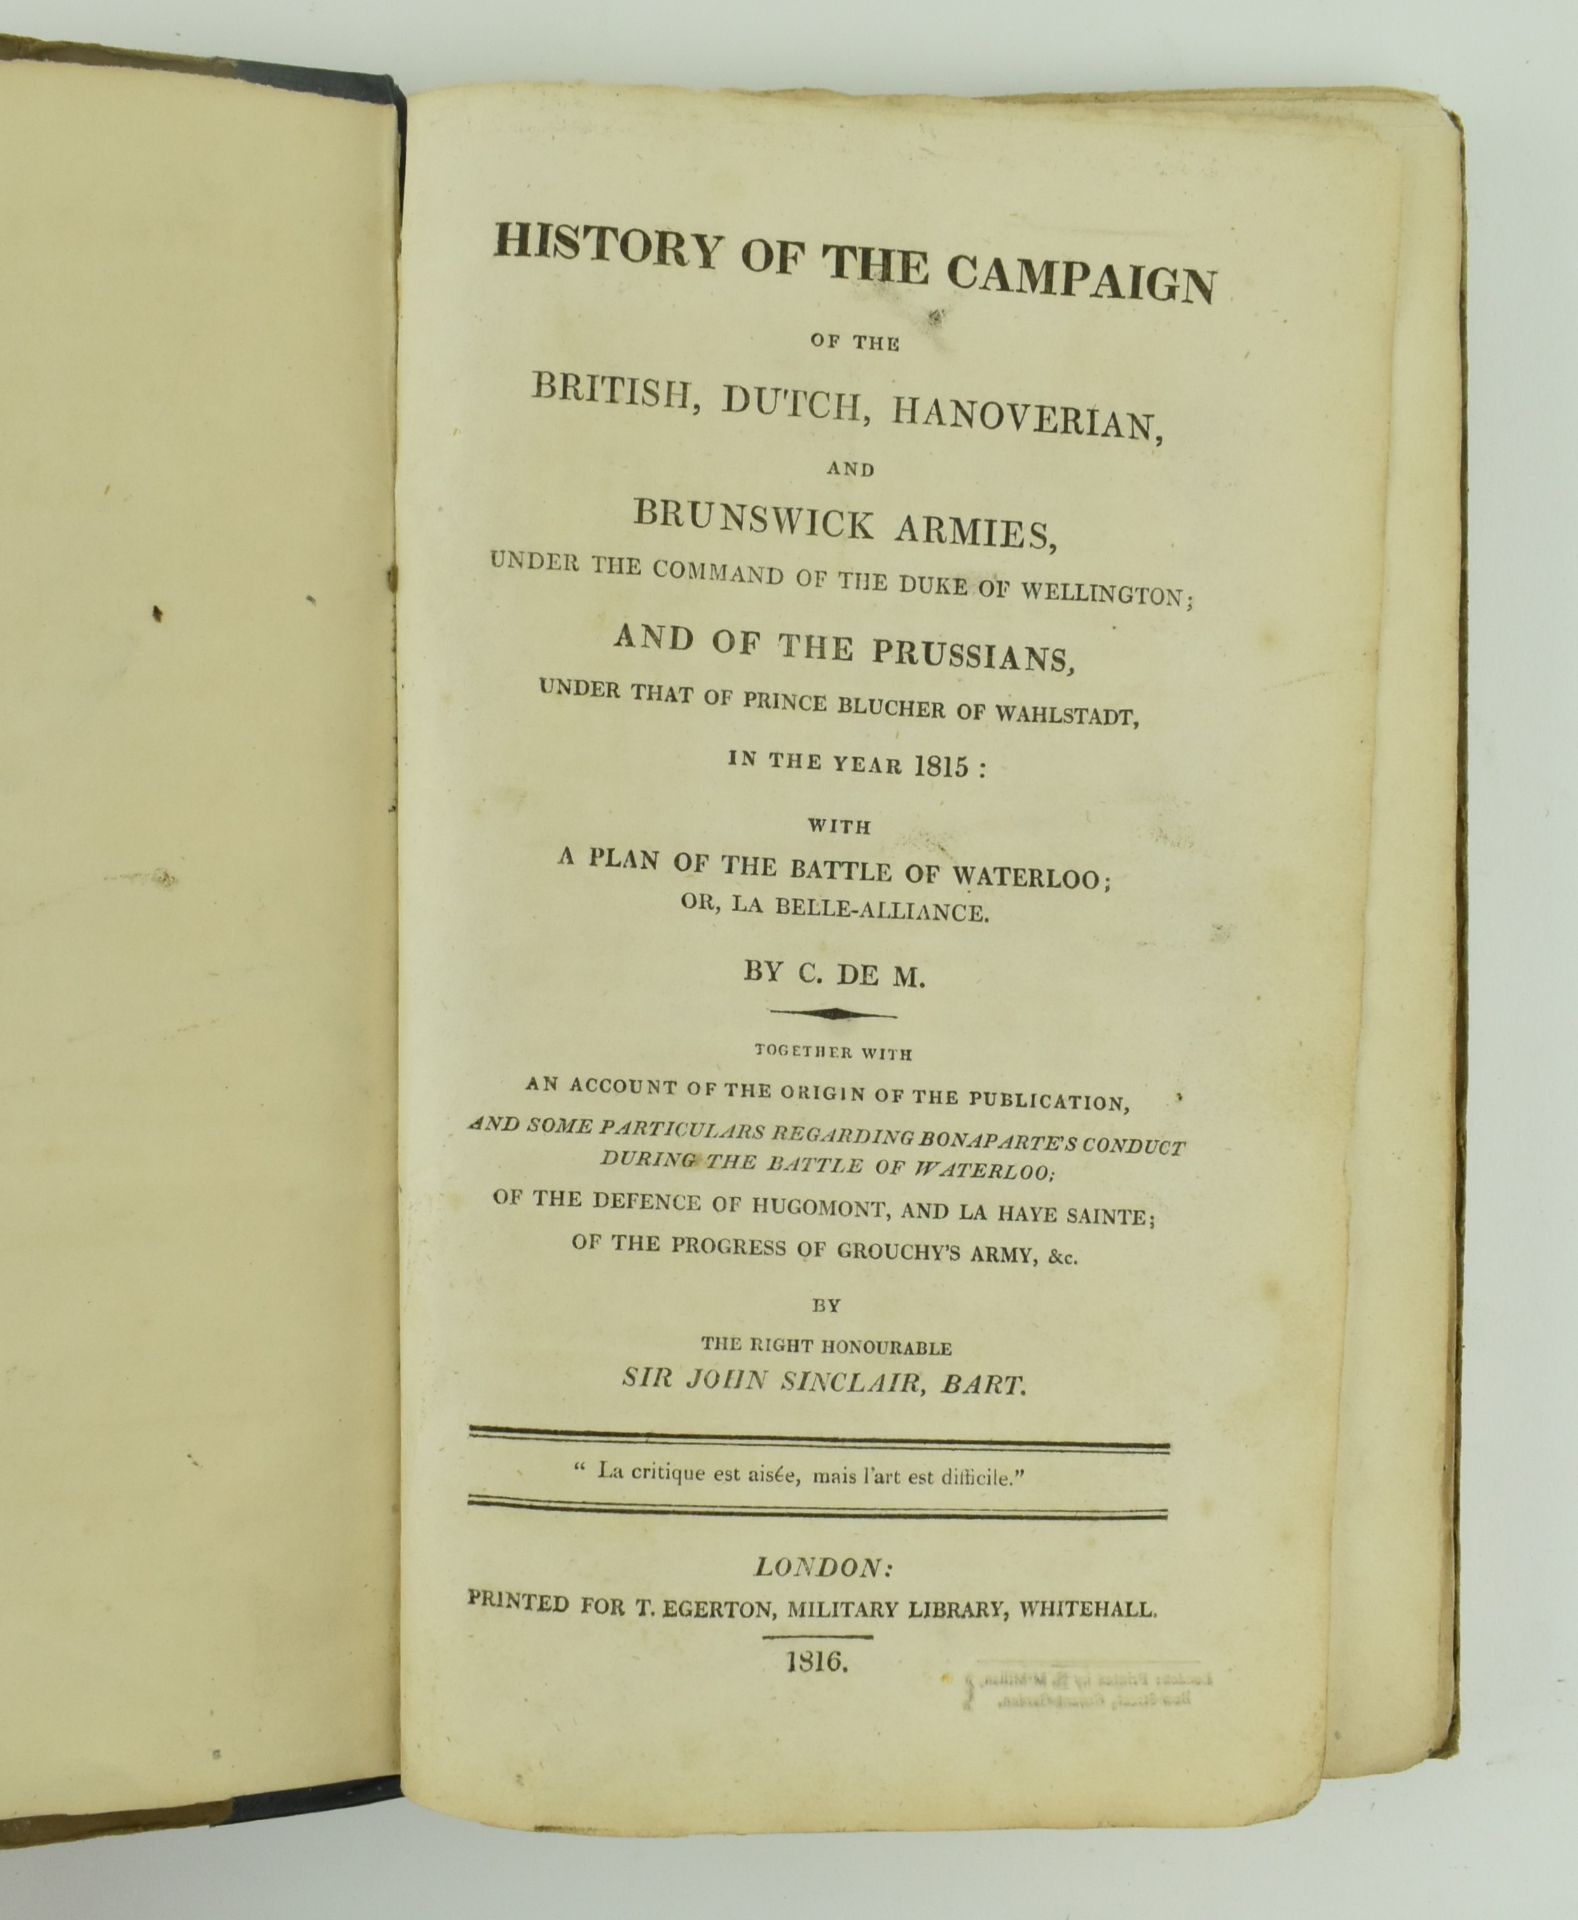 [VON MUFFLING, CARL] 1816 HISTORY OF THE CAMPAIGN OF ARMIES - Image 2 of 6